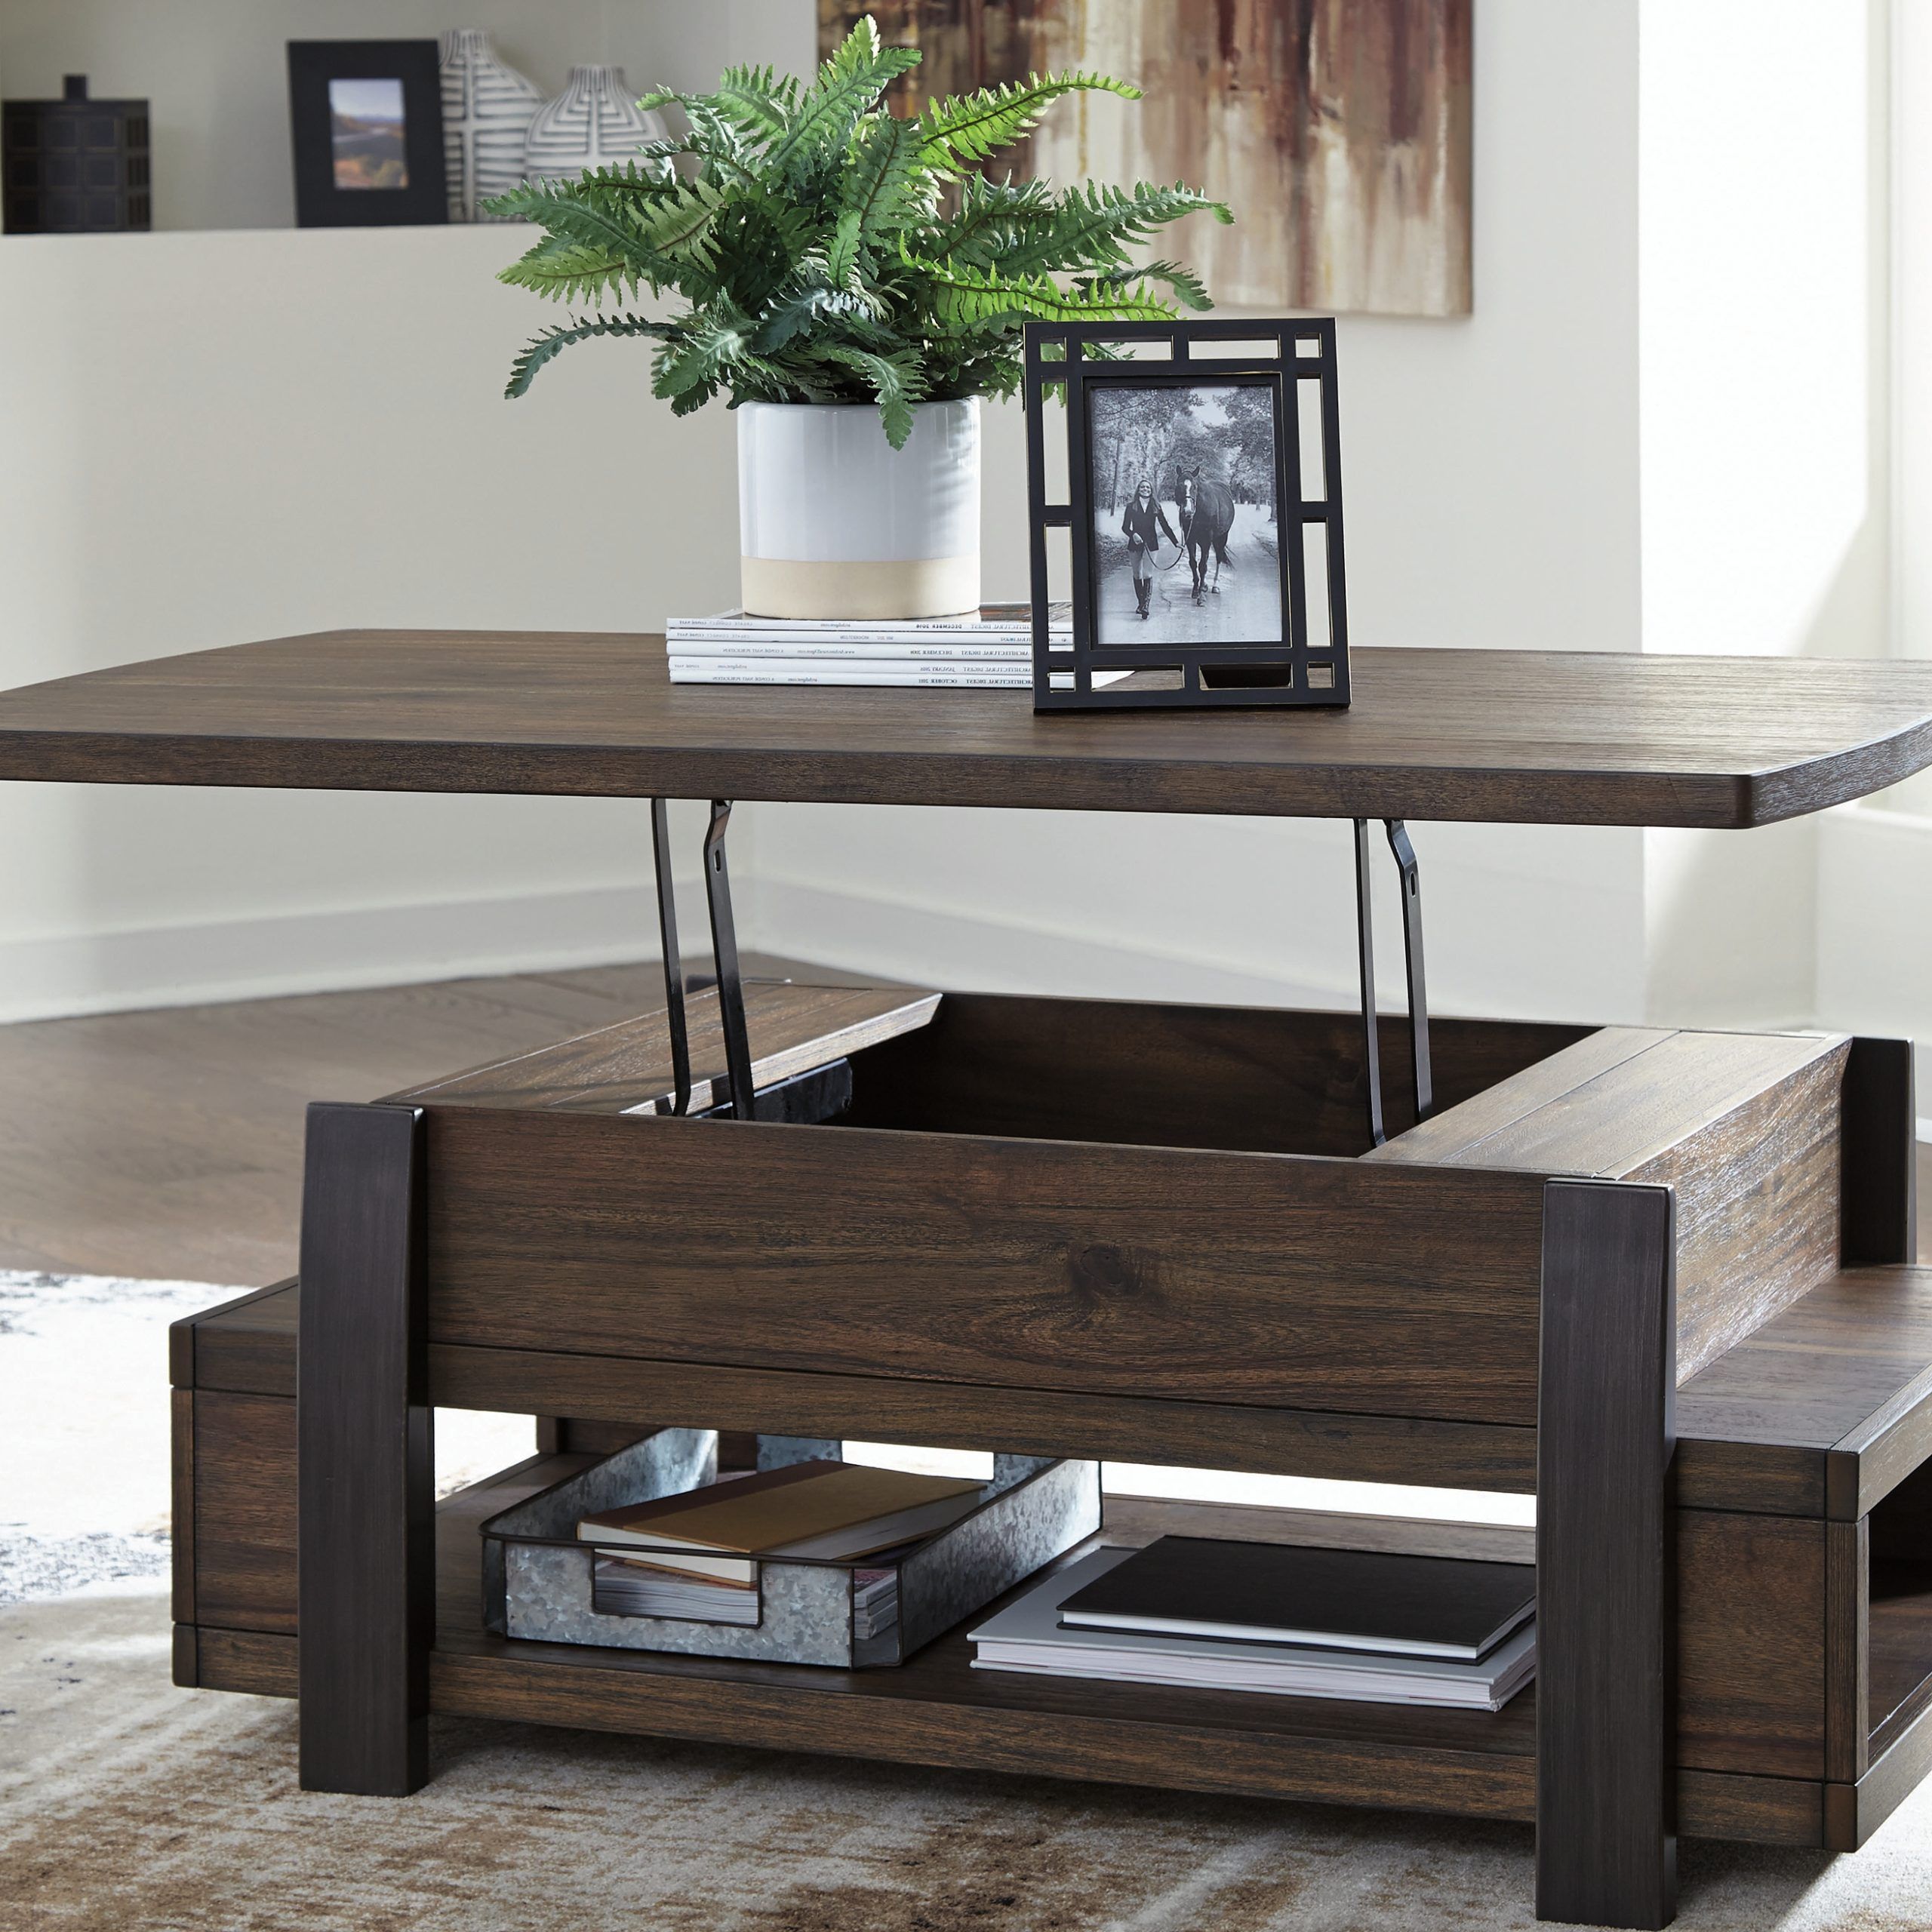 Vailbry Coffee Table With Lift Top T758 9signature Designashley Throughout Most Recent Lift Top Coffee Tables With Storage (View 7 of 15)